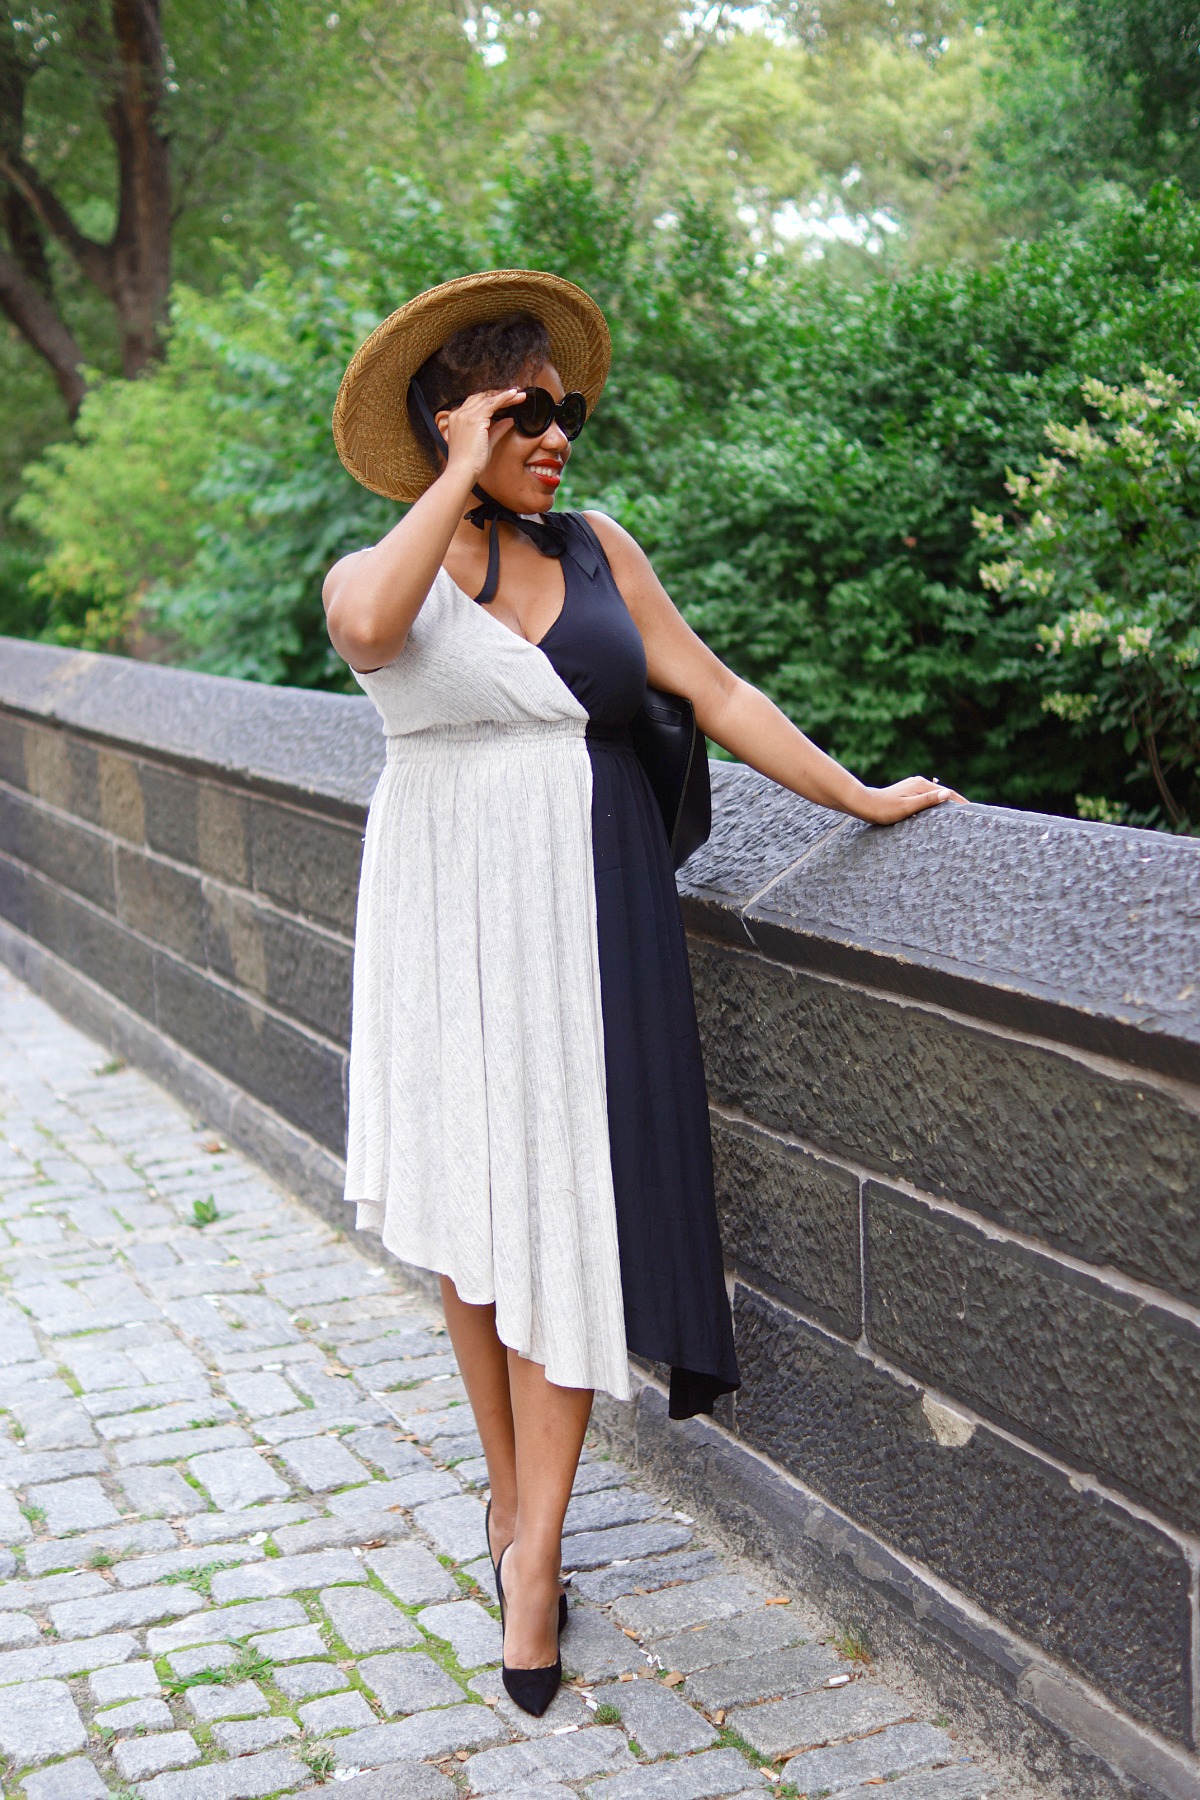 Anthropologie Dress, Fall Transitional Pieces, NYC Fashion Blogger, Closet Confections